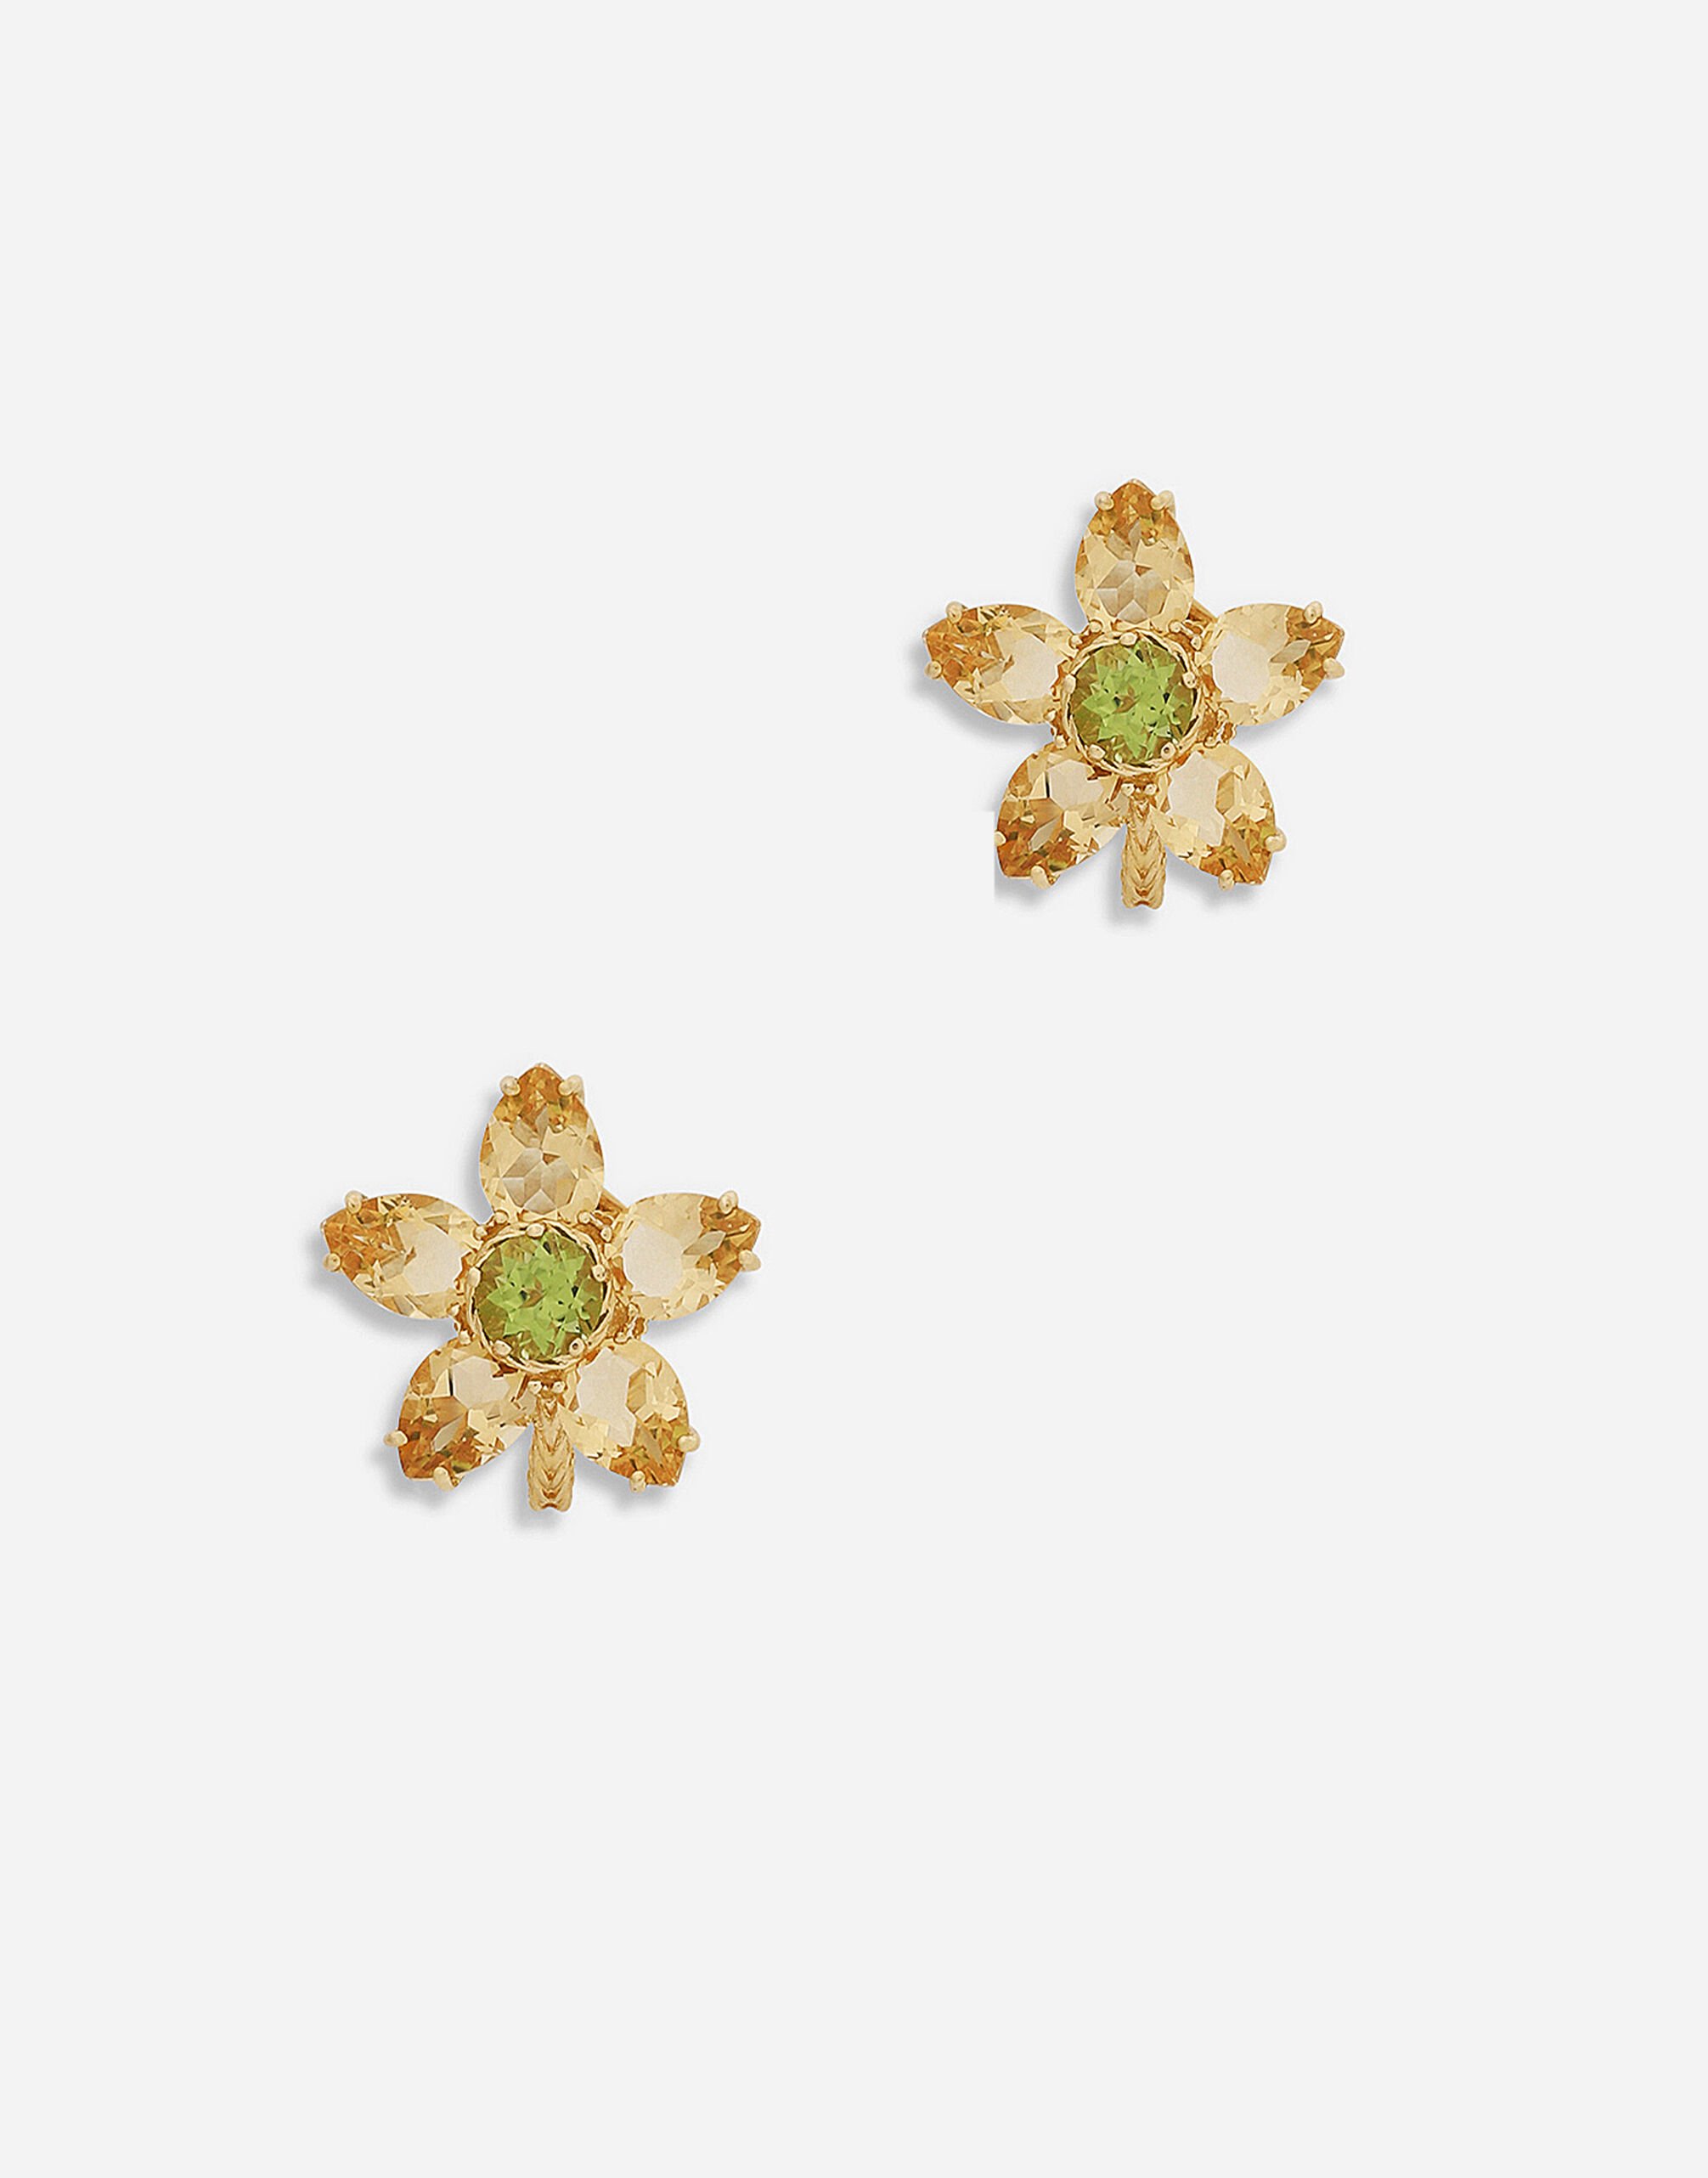 Dolce & Gabbana Spring earrings in yellow 18kt gold with citrine flower motif Gold WEQA2GWPE01